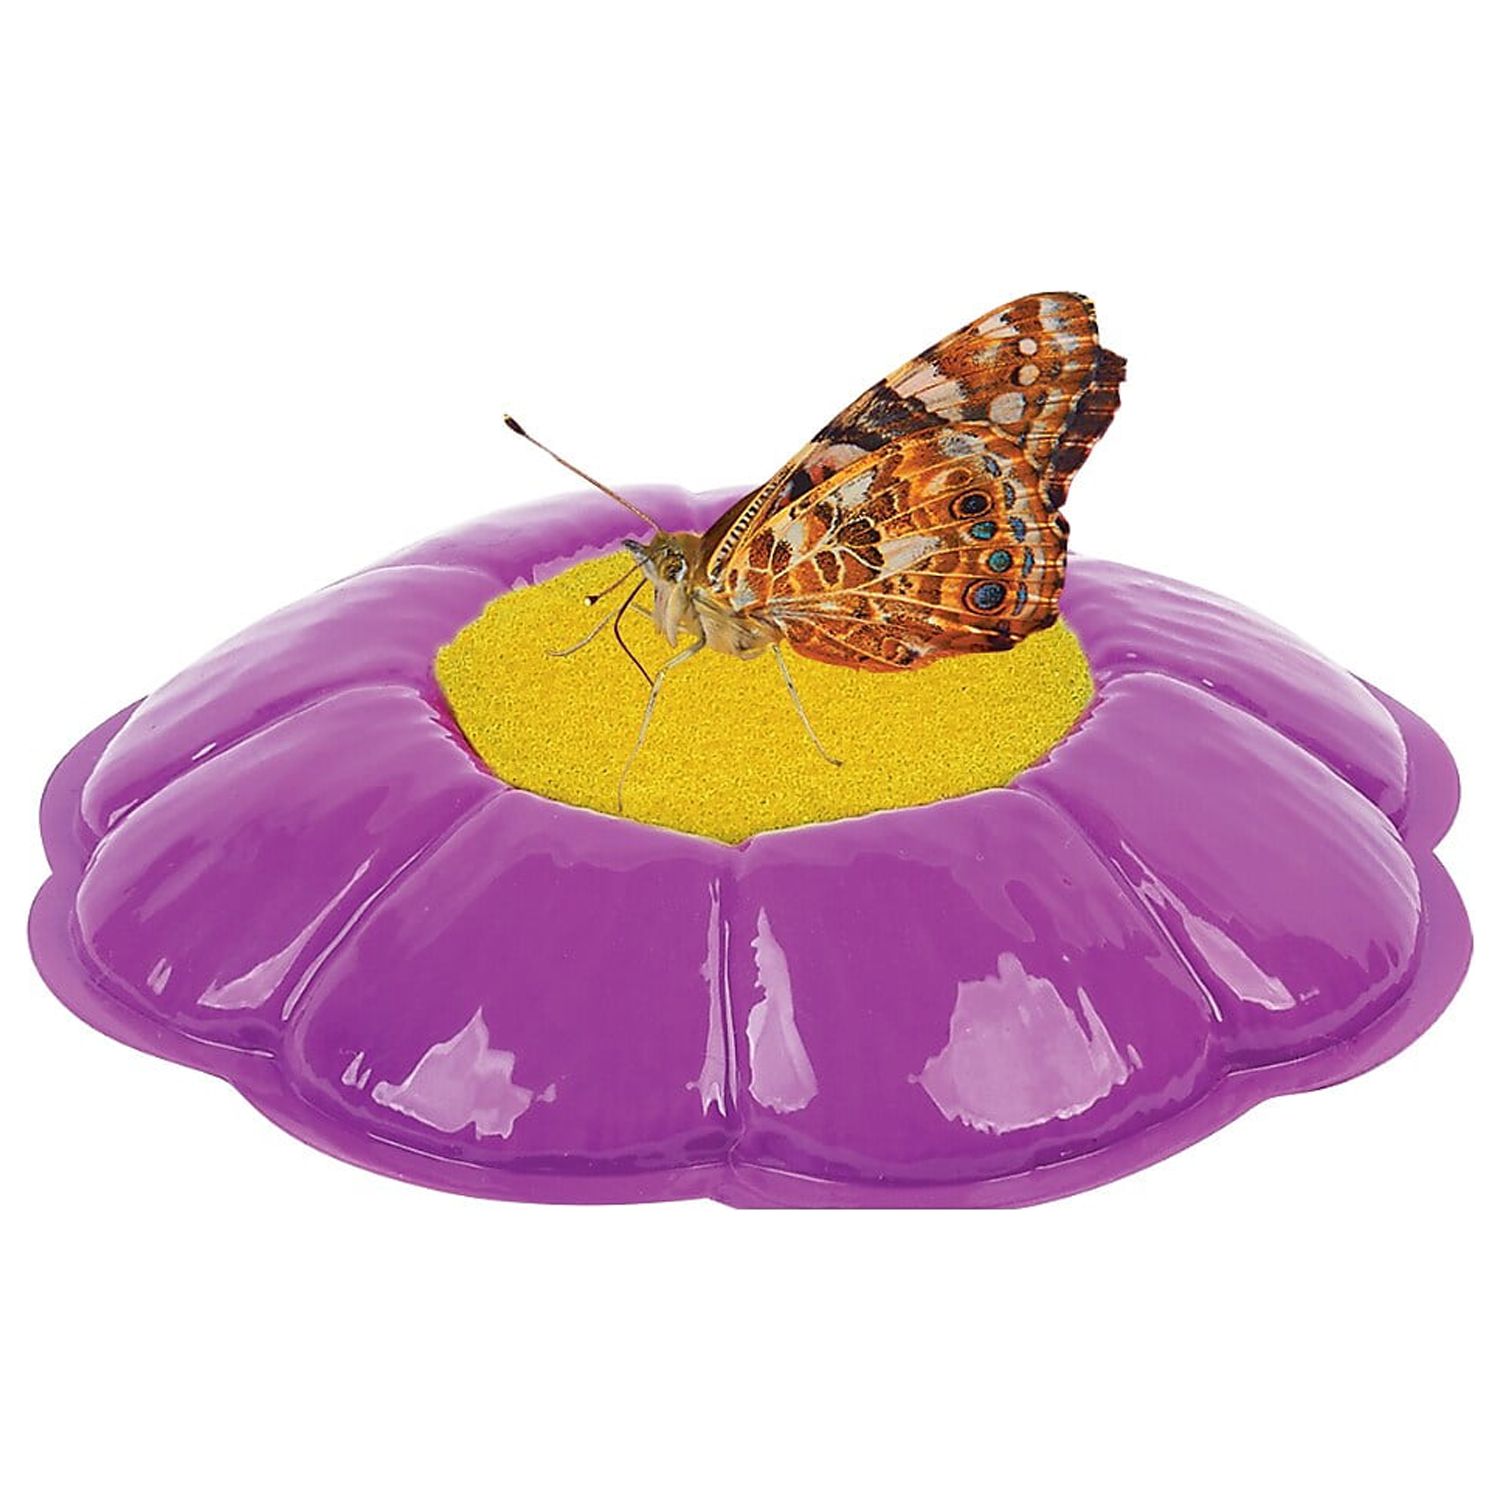 Insect Lore Butterfly Garden® Growing Kit- With Voucher to Redeem Caterpillars Later - image 3 of 6